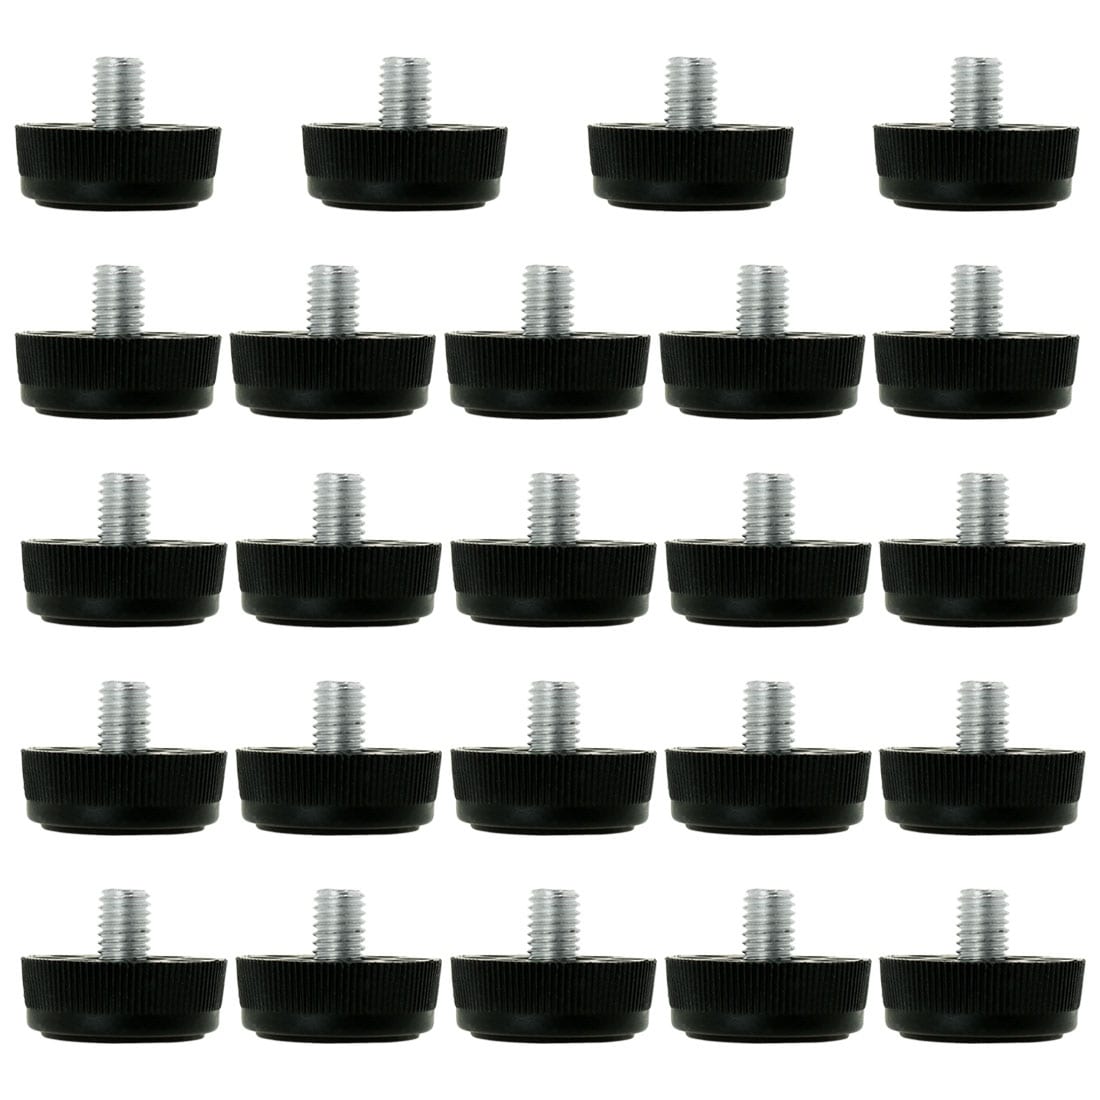 uxcell® M8 x 25 x 28mm Screw on Furniture Glide Leveling Feet Adjustable Leveler Pad for Chair Industrial Machine Desk Leg White Cap 16 Pack